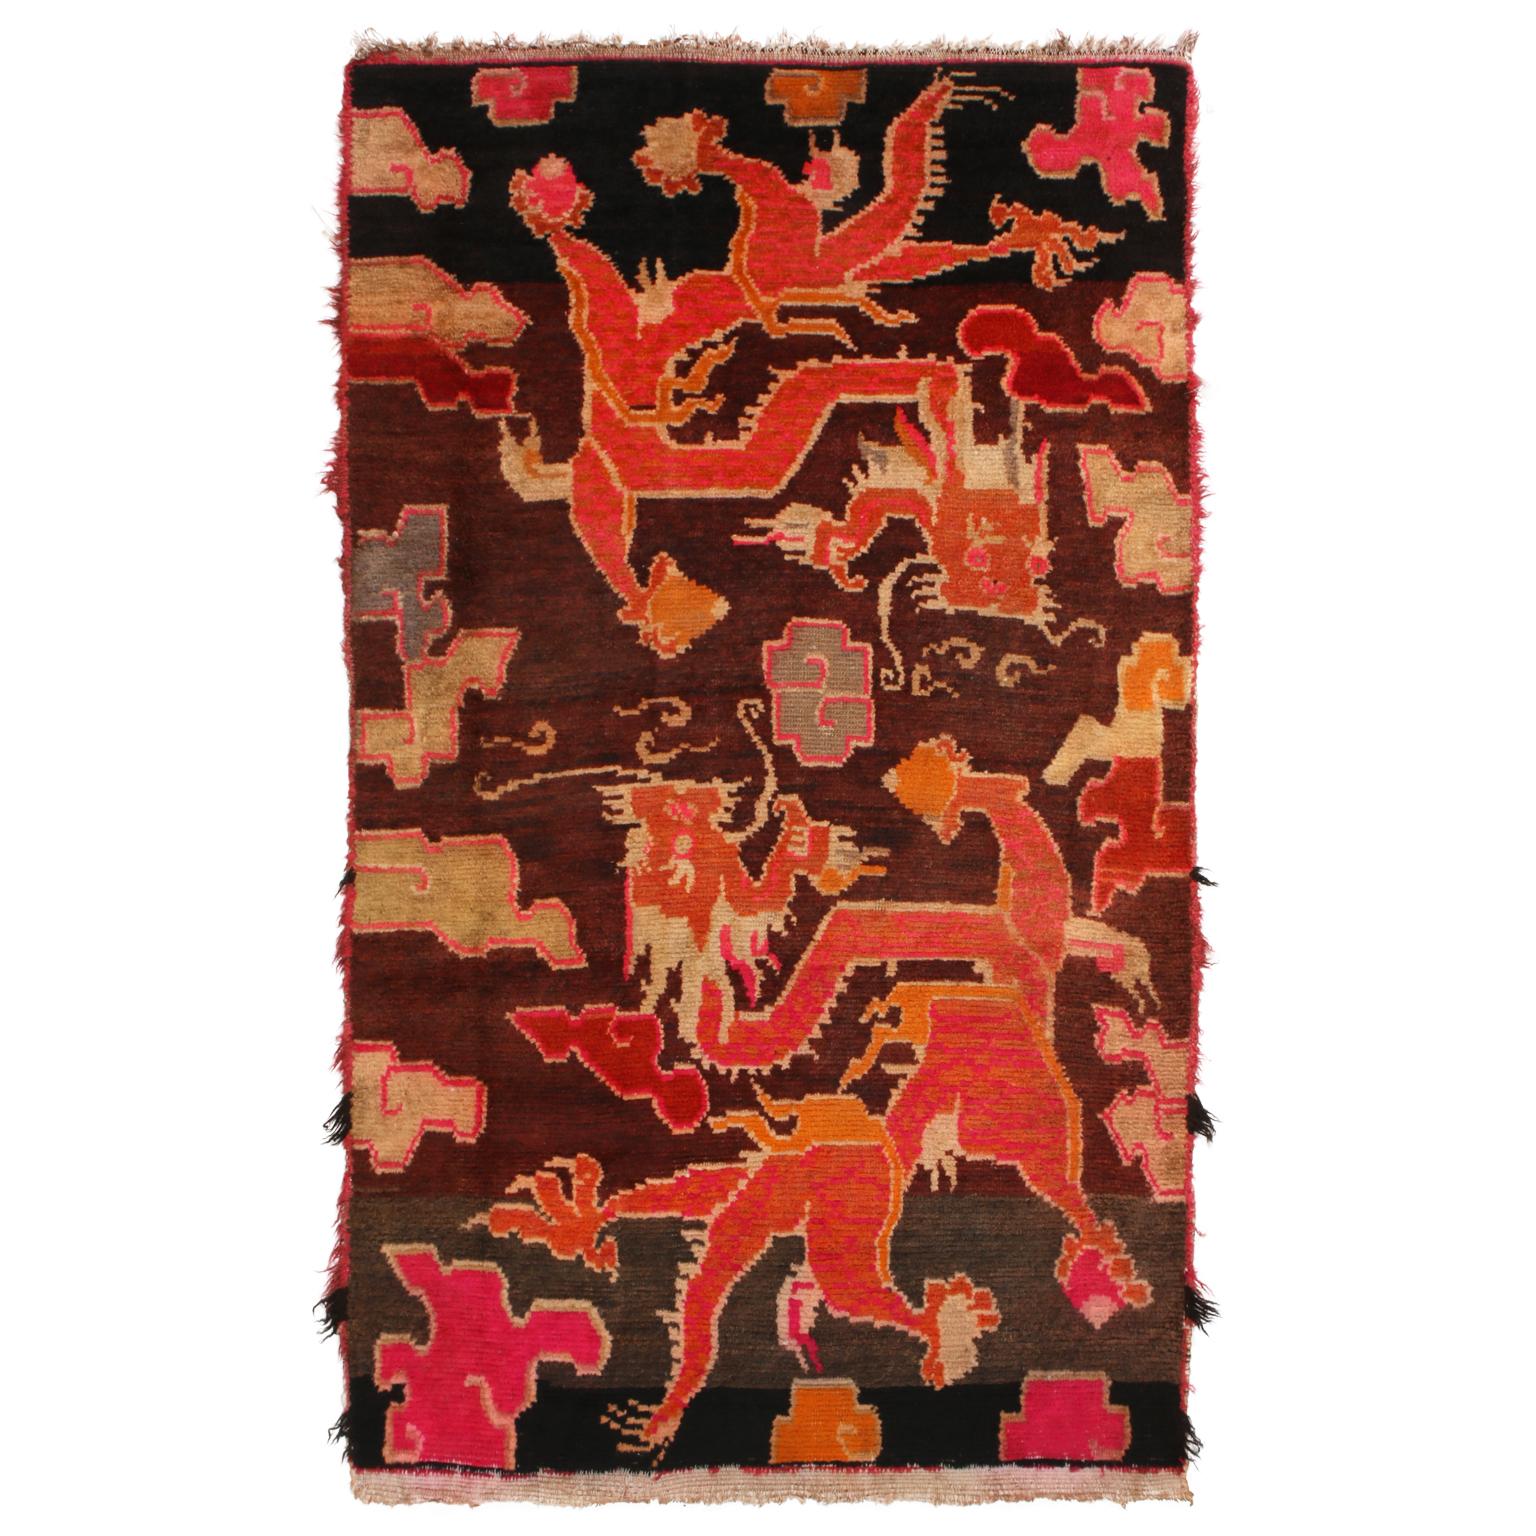 Antique Tibetan Orange and Brown Wool Rug with Dragon and Cloud Motifs 1